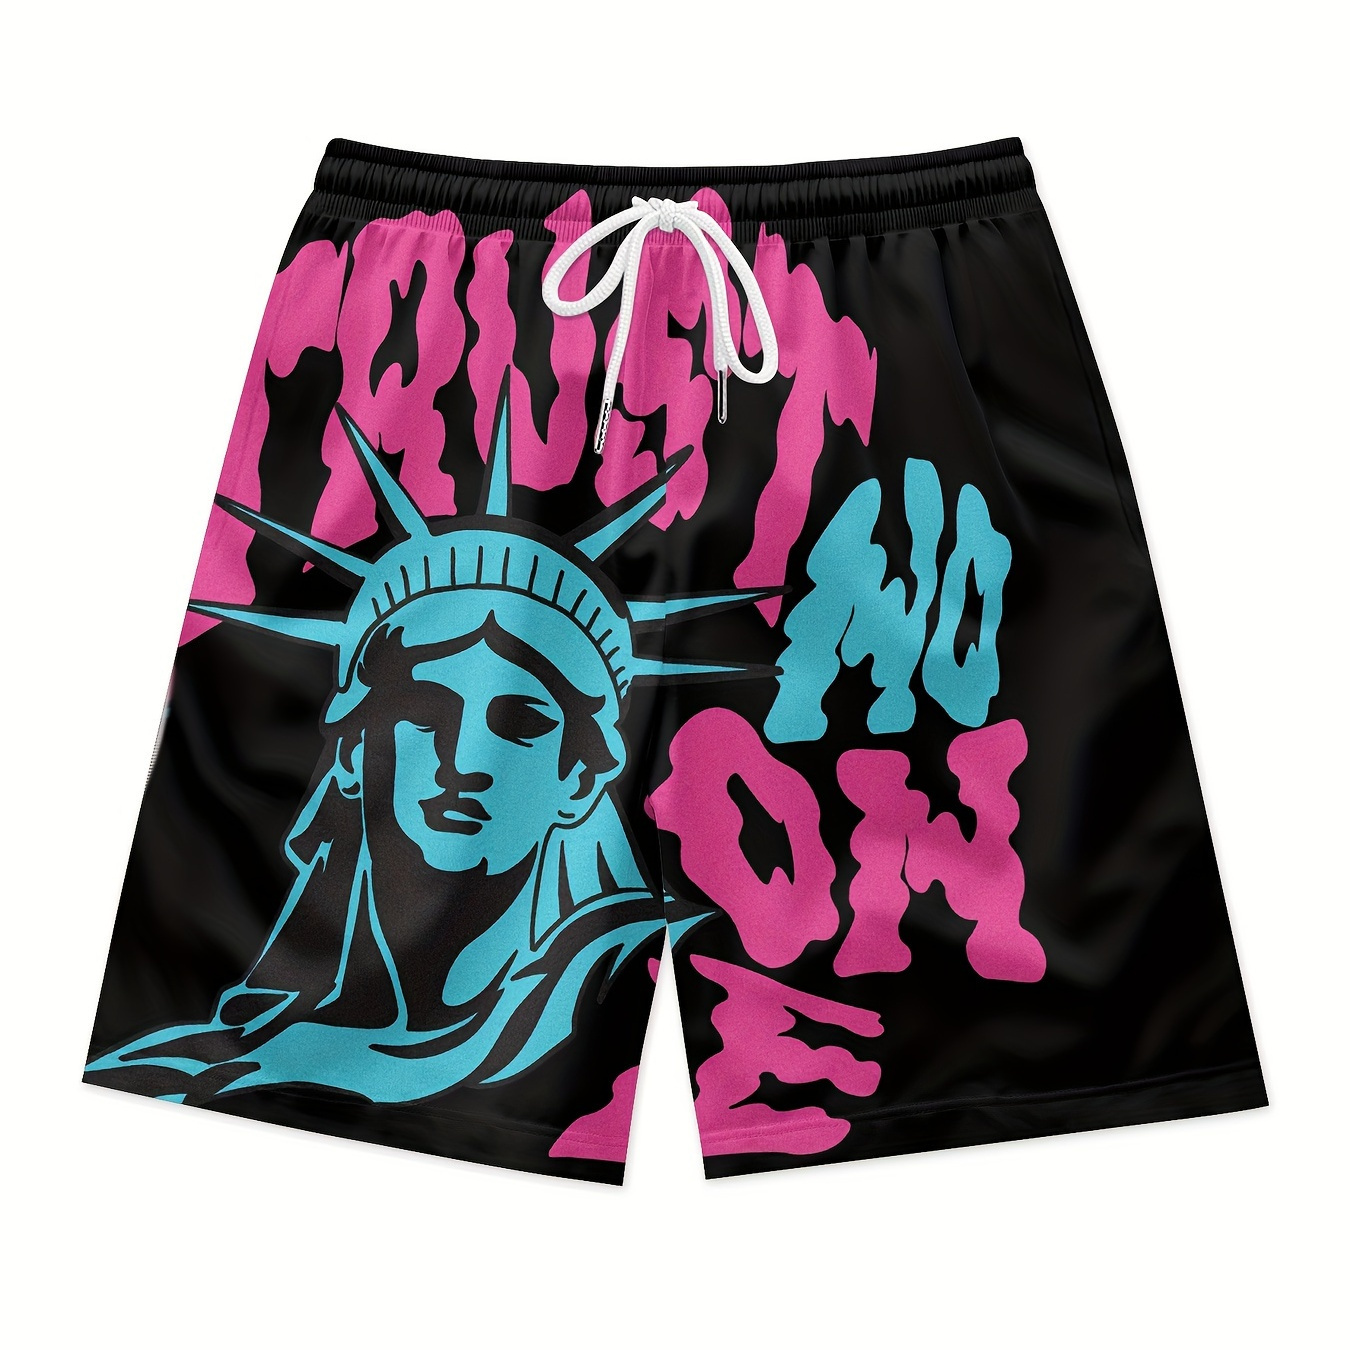 

Hand-painted Statue Print Men's Waist Shorts Quick Dry Breathable Polyester Shorts Daily Streetwear Vacation Stylish Shorts Sport Clothing Bottoms